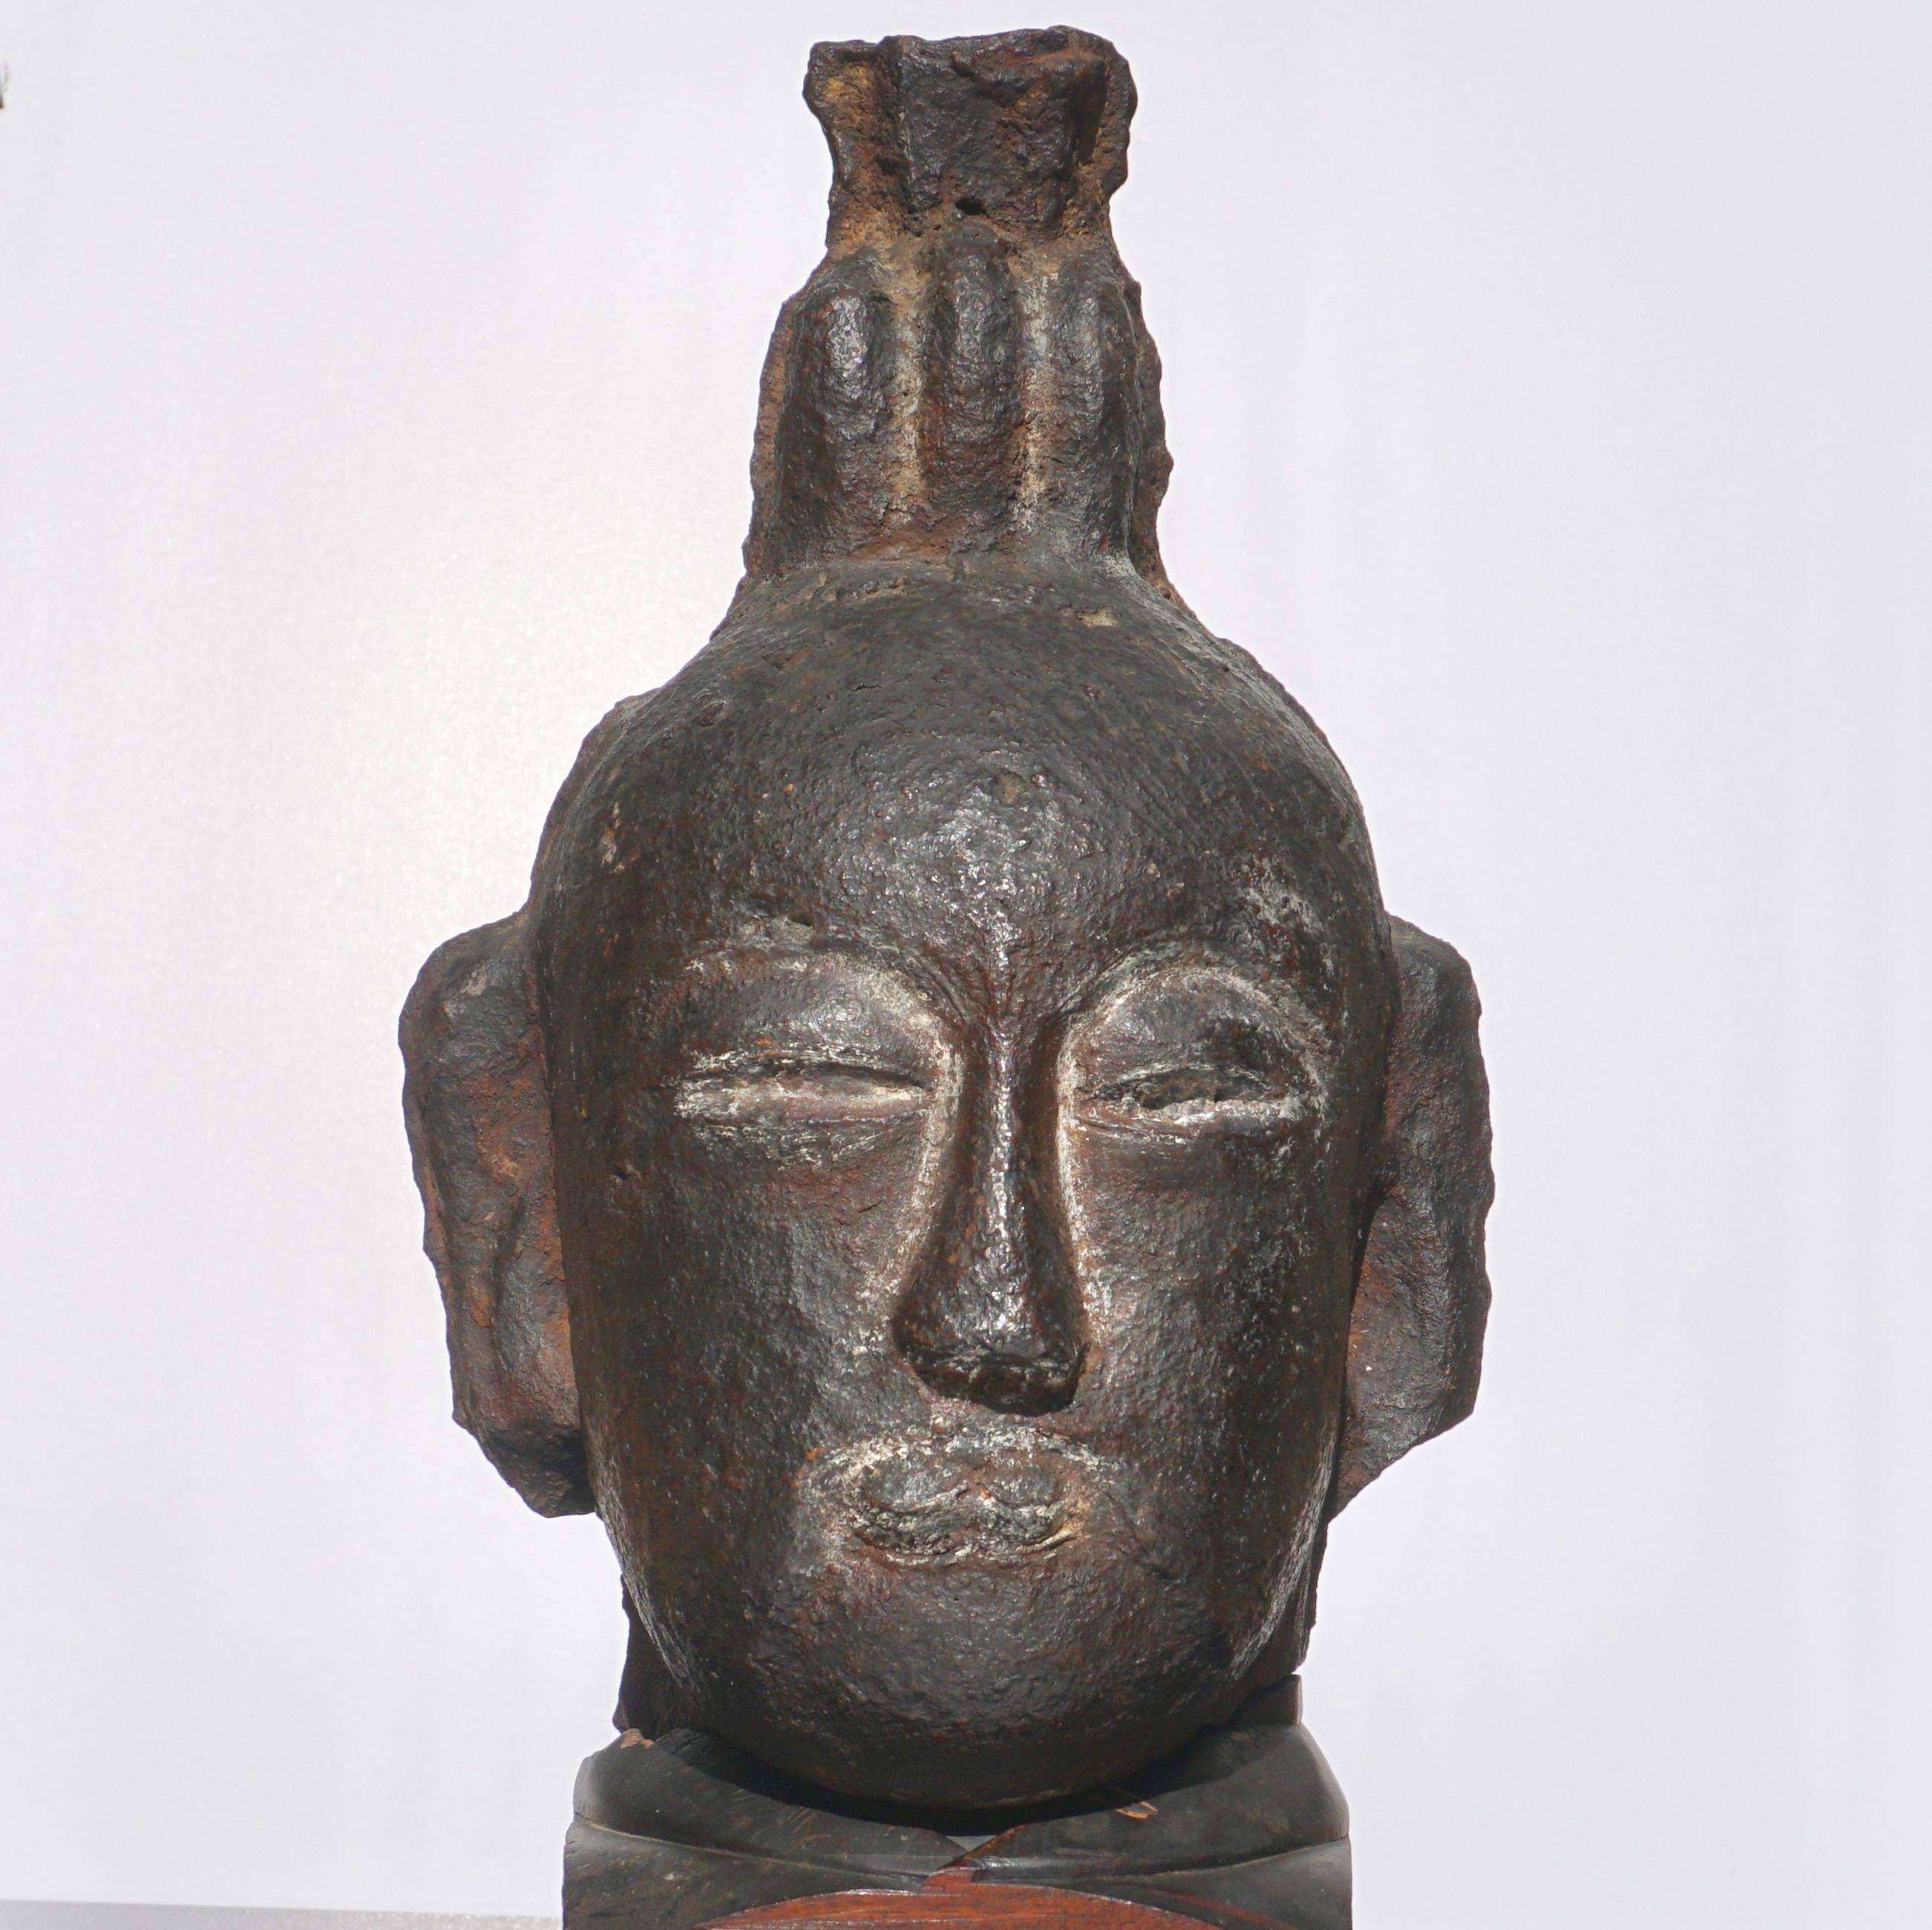 Daoist sage, official, or possibly a Buddhist acolyte.

A large, thick and heavy cast iron statue of a head. Custom vintage carved hardwood stand finishes off this outstanding and decorative bust, circa 10th - 14th century or earlier.

Measures: